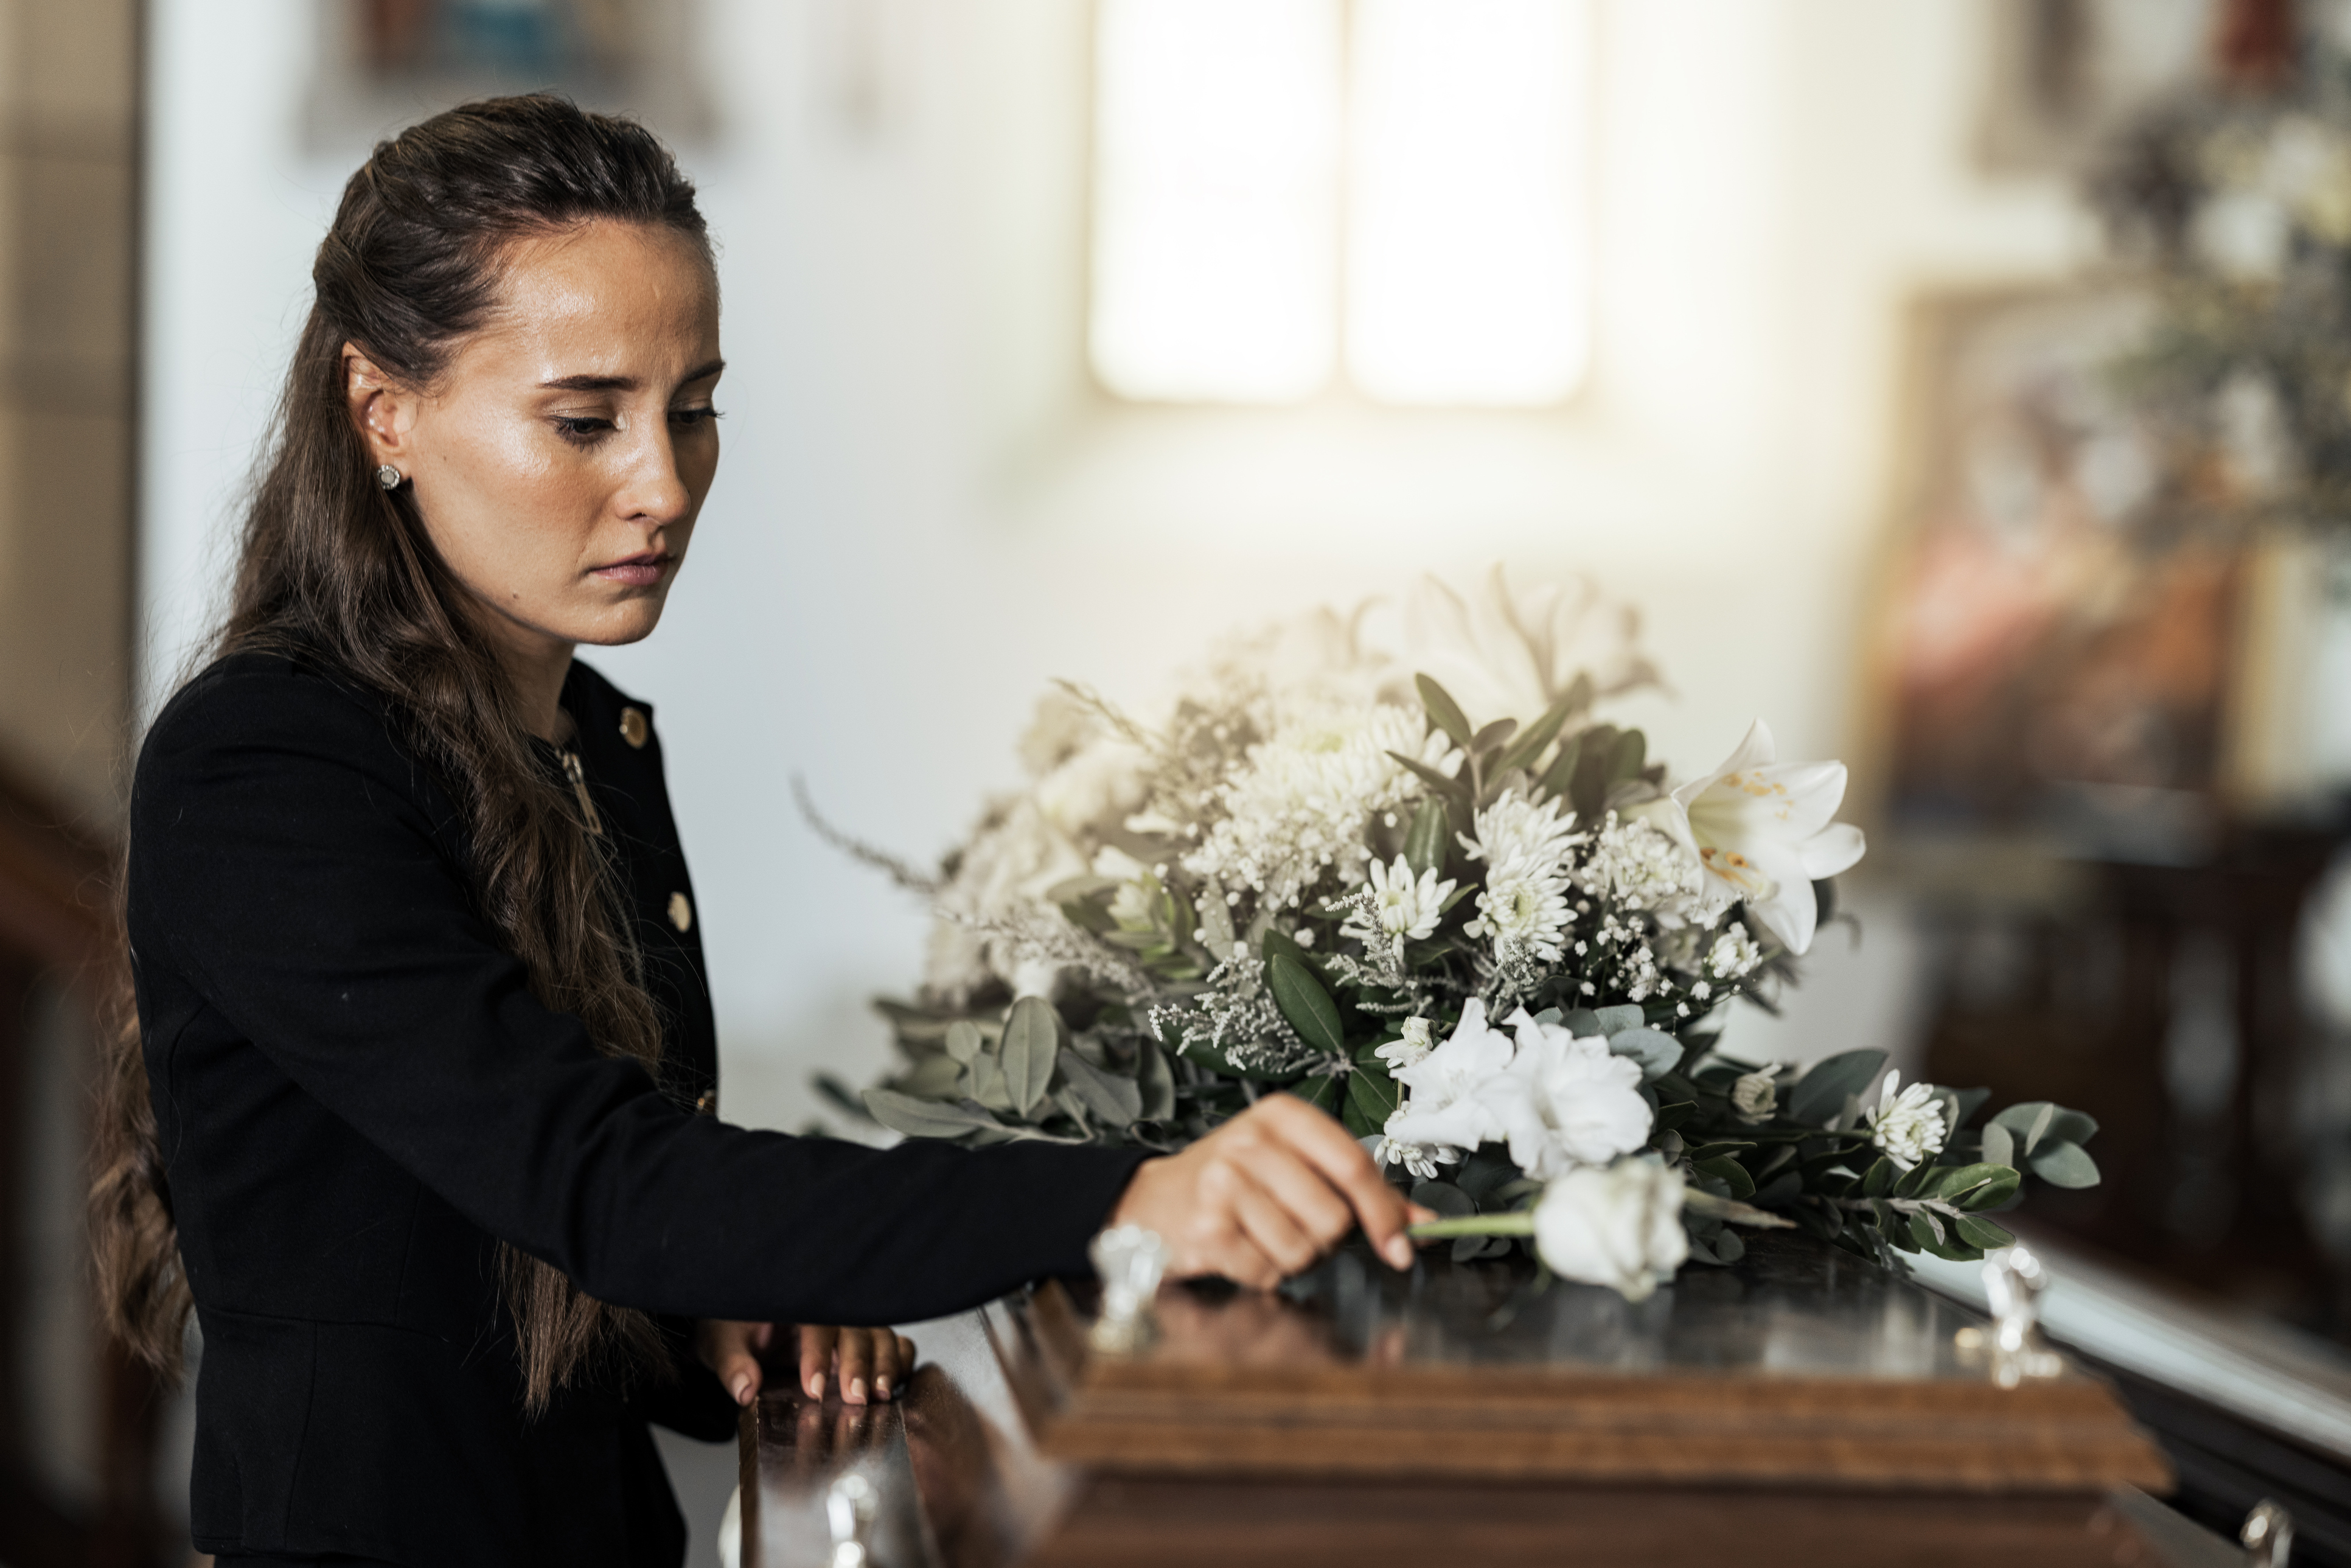 How to choose between having a burial or cremation